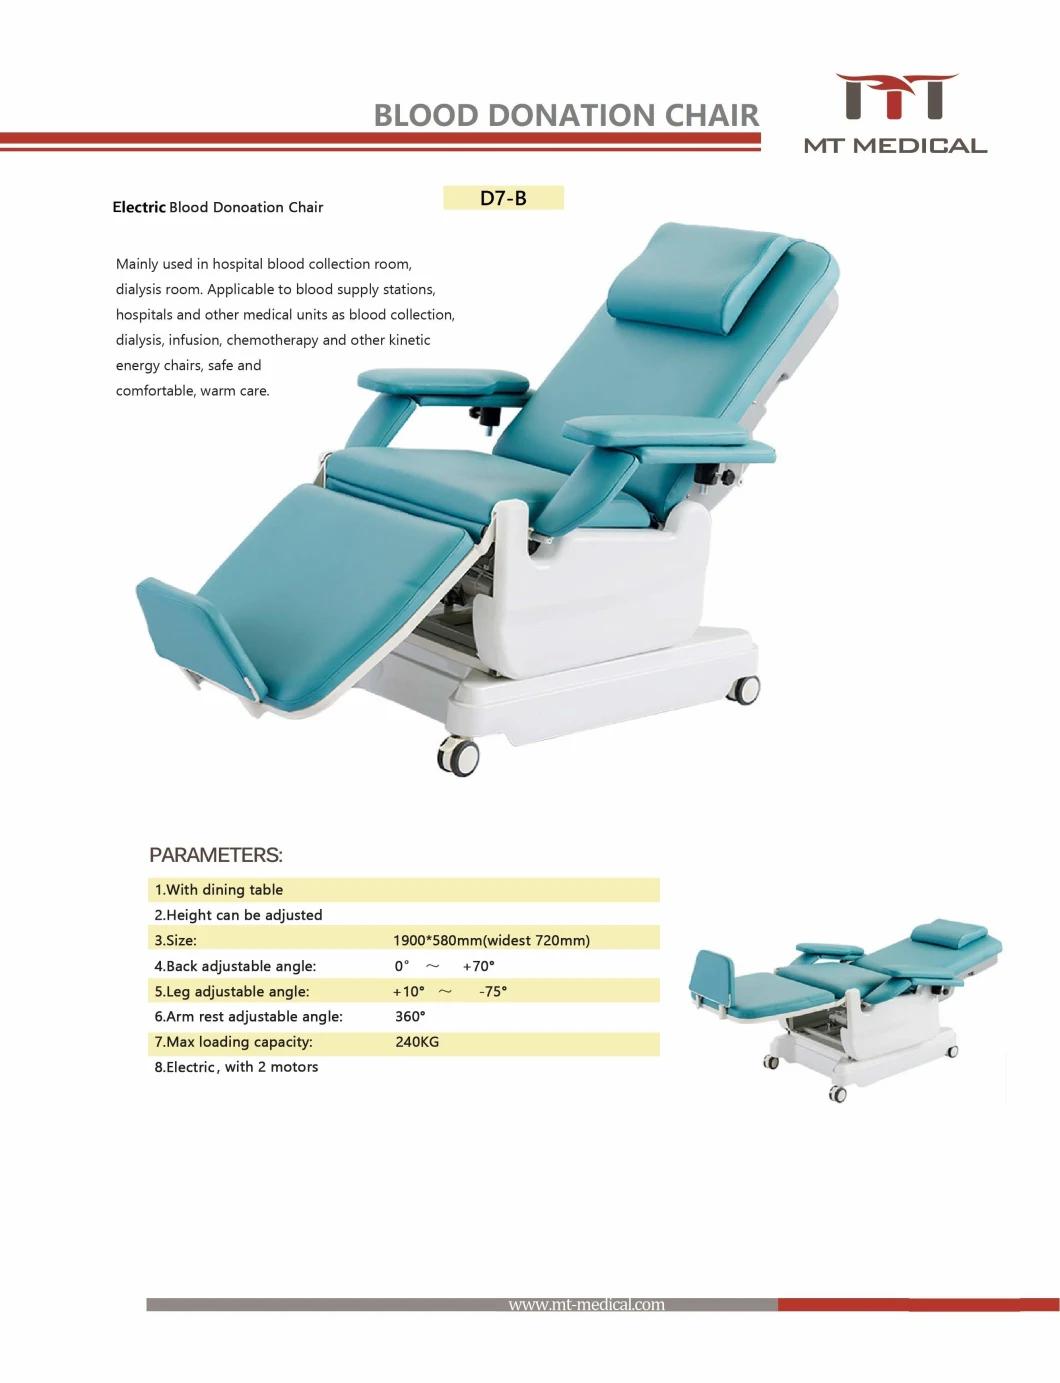 Mt Medical Electric Medical Chair Dialysis Chemotherapy Blood Bank Donation Collection Chair Price